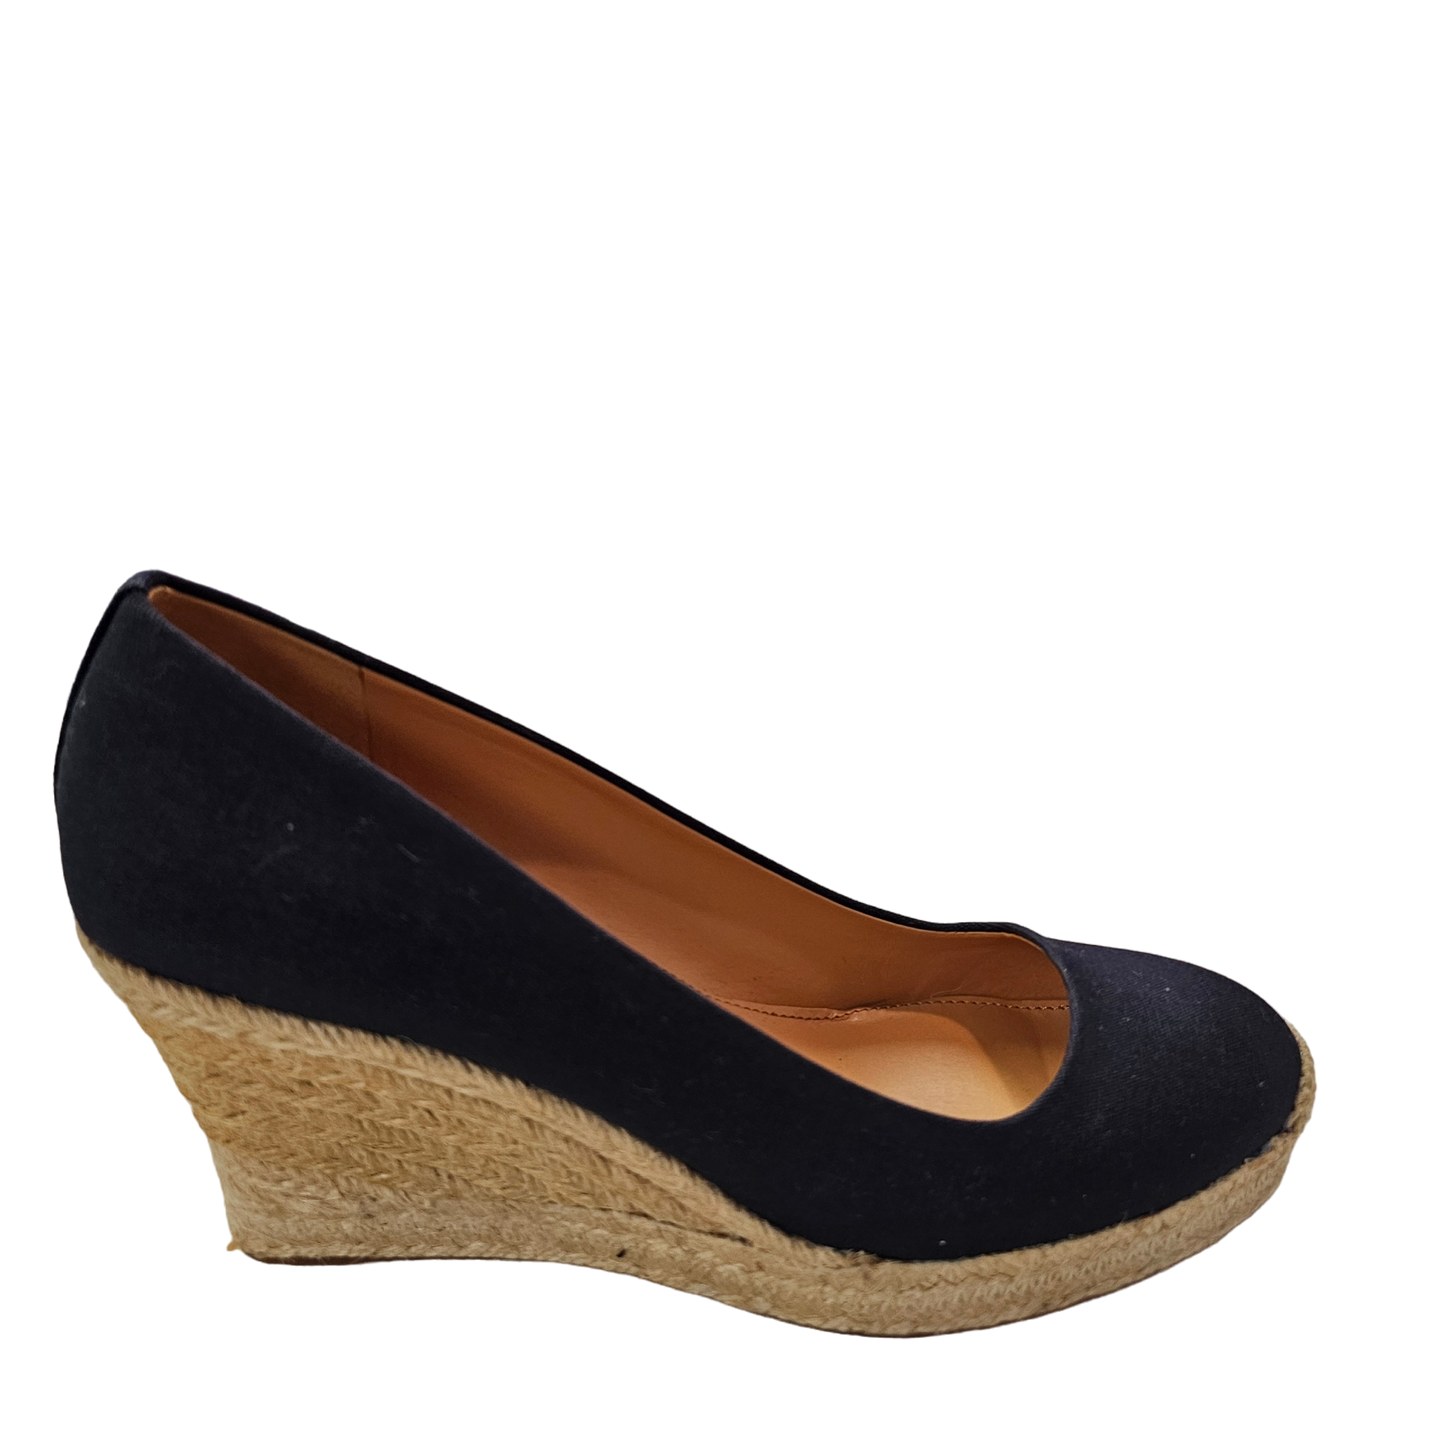 Shoes Heels Espadrille Wedge By J Crew  Size: 9.5